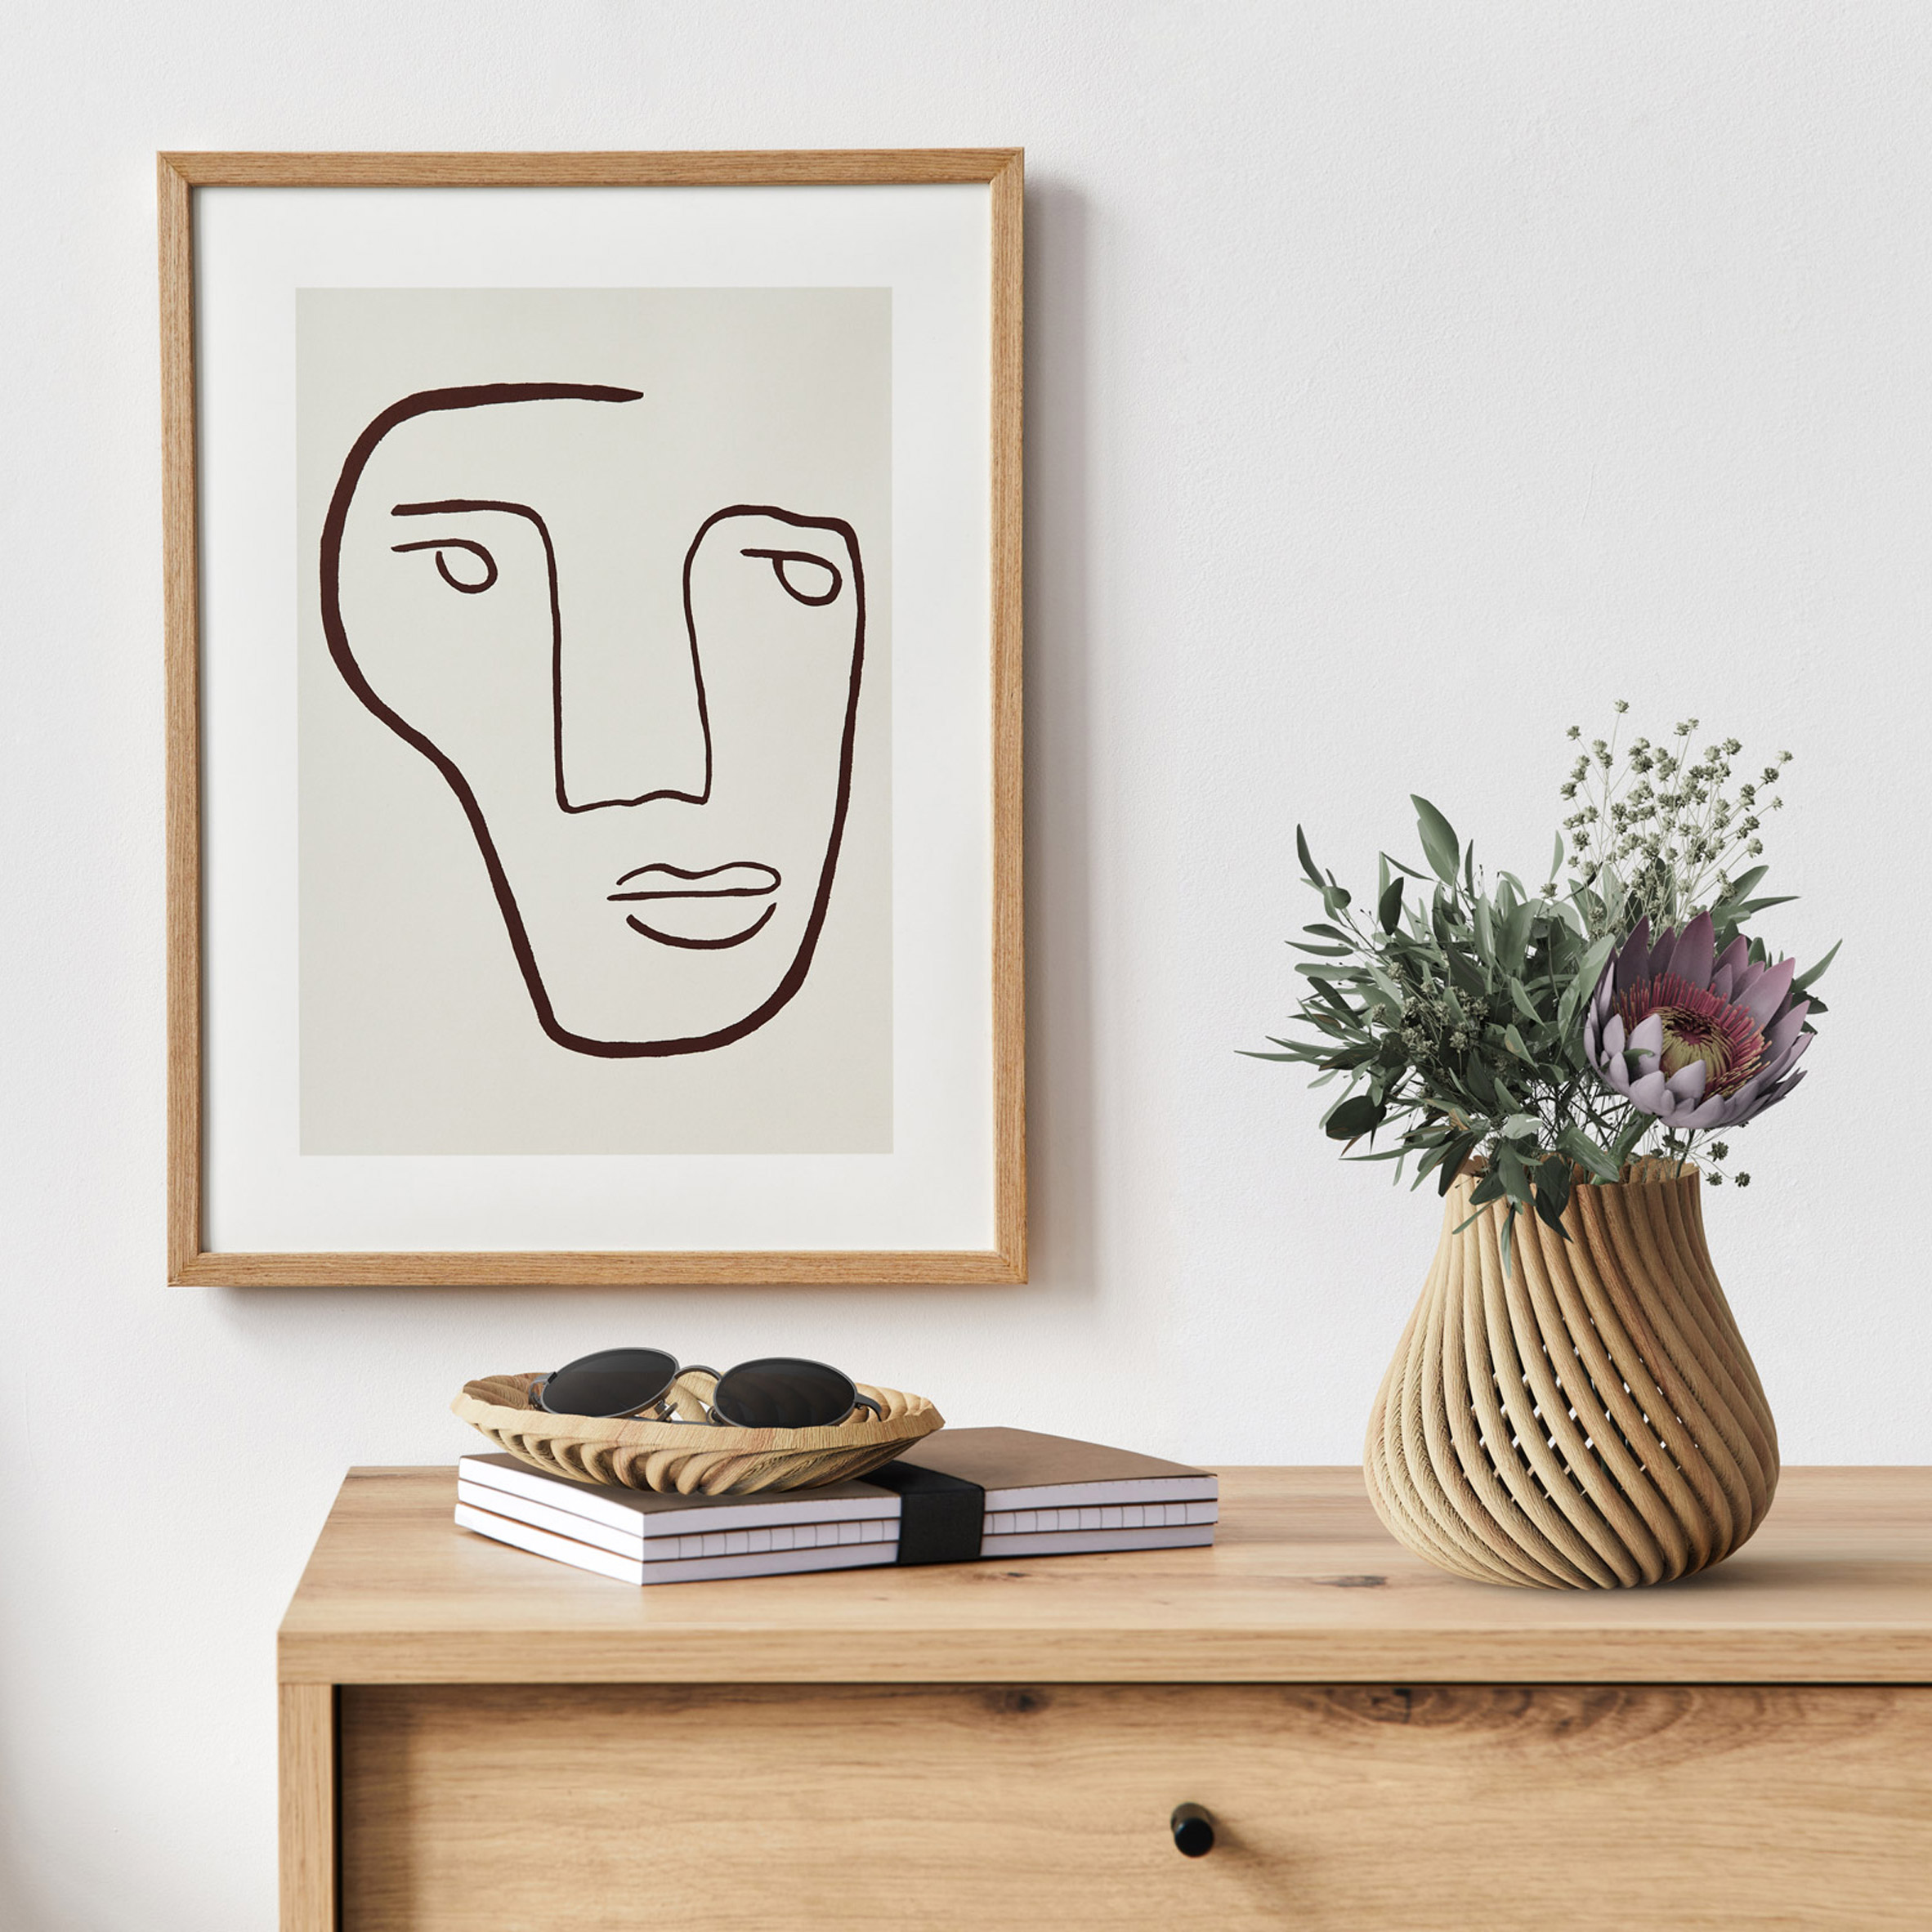 Christmas gift guide: Forust homeware by fuseproject